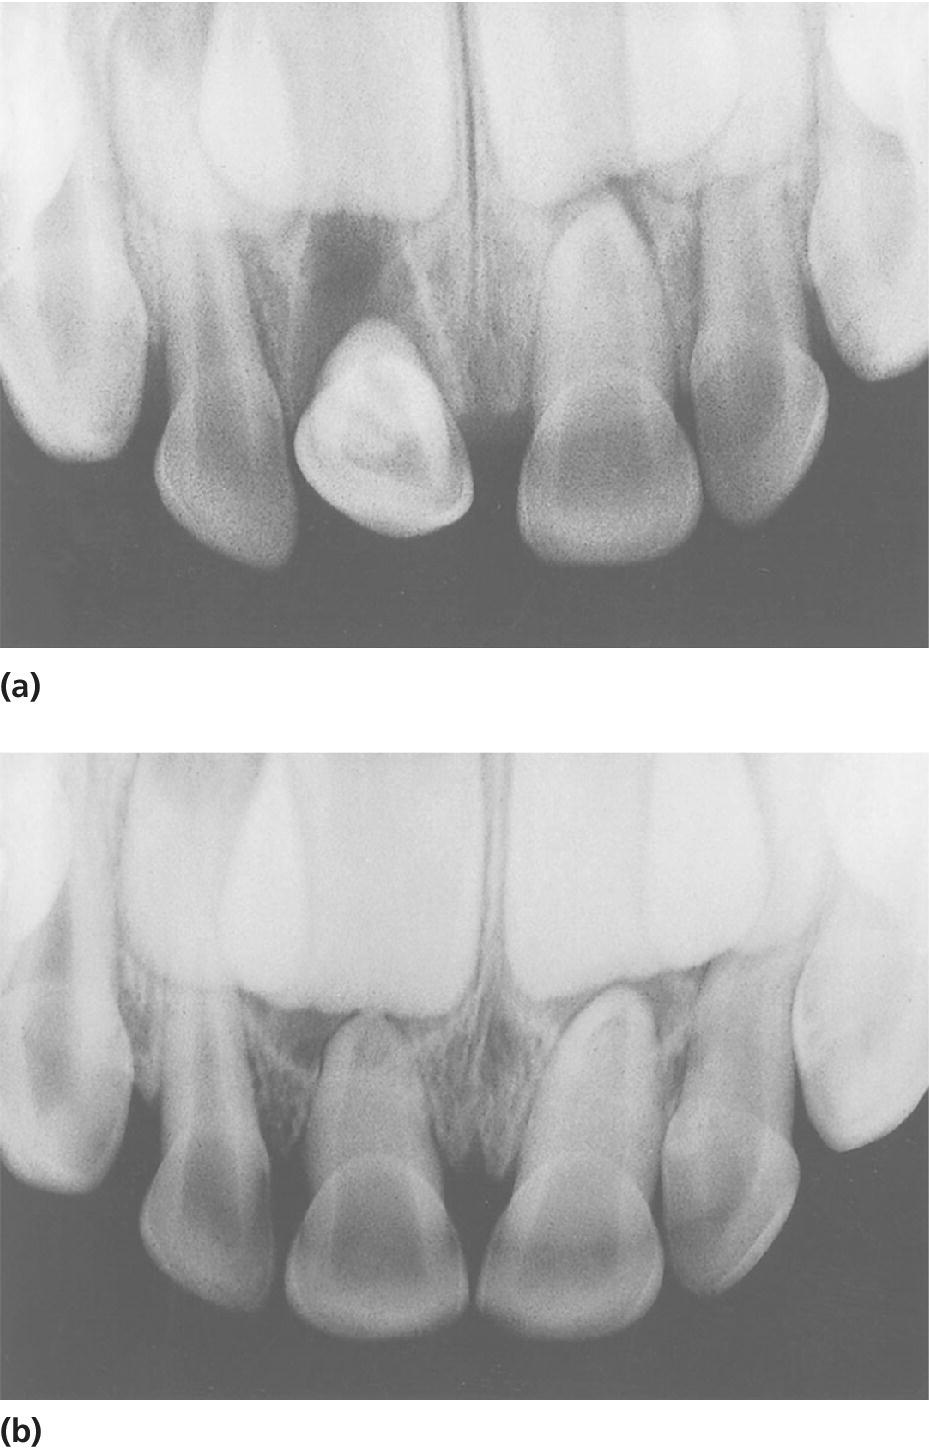 Radiographs displaying severe palatal luxation of the right central incisor (top) and tooth which is back in normal position due to tongue pressure (bottom).